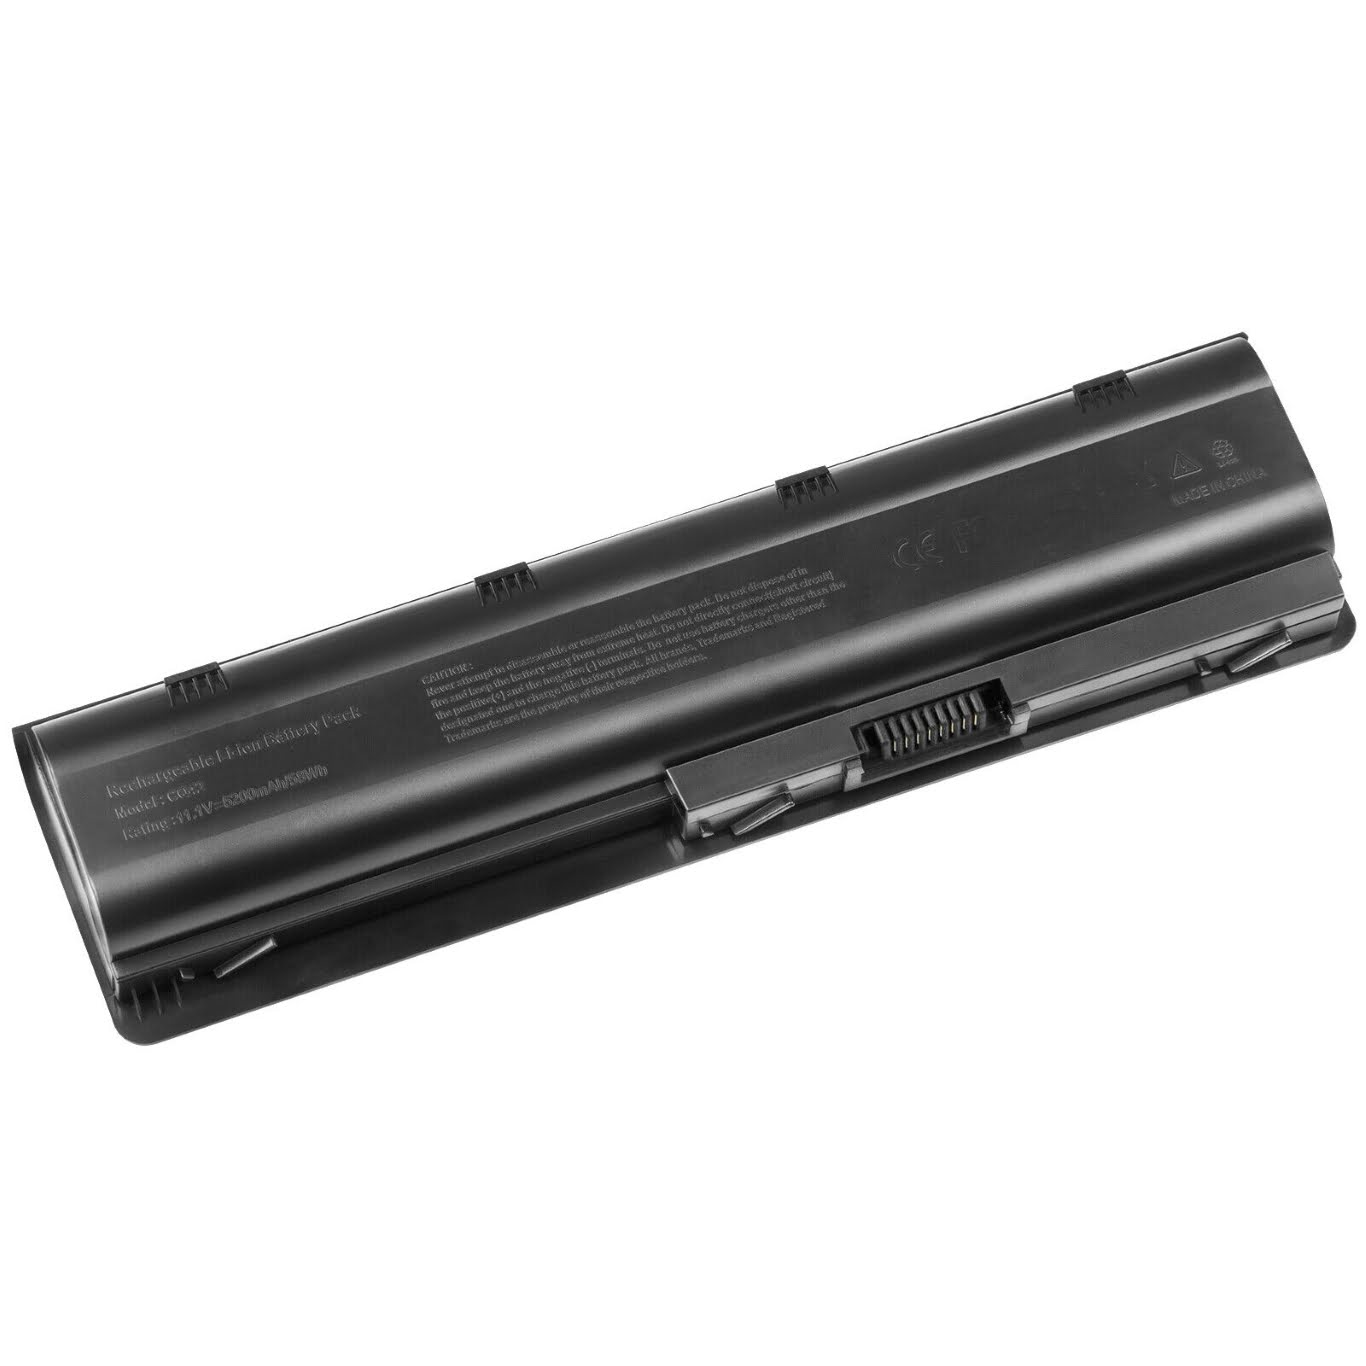 586006-121, 586006-122 replacement Laptop Battery for HP 2000 Notebook PC, 2000z-100 CTO Notebook PC, 5200mAh, 6 cells, 11.1 V